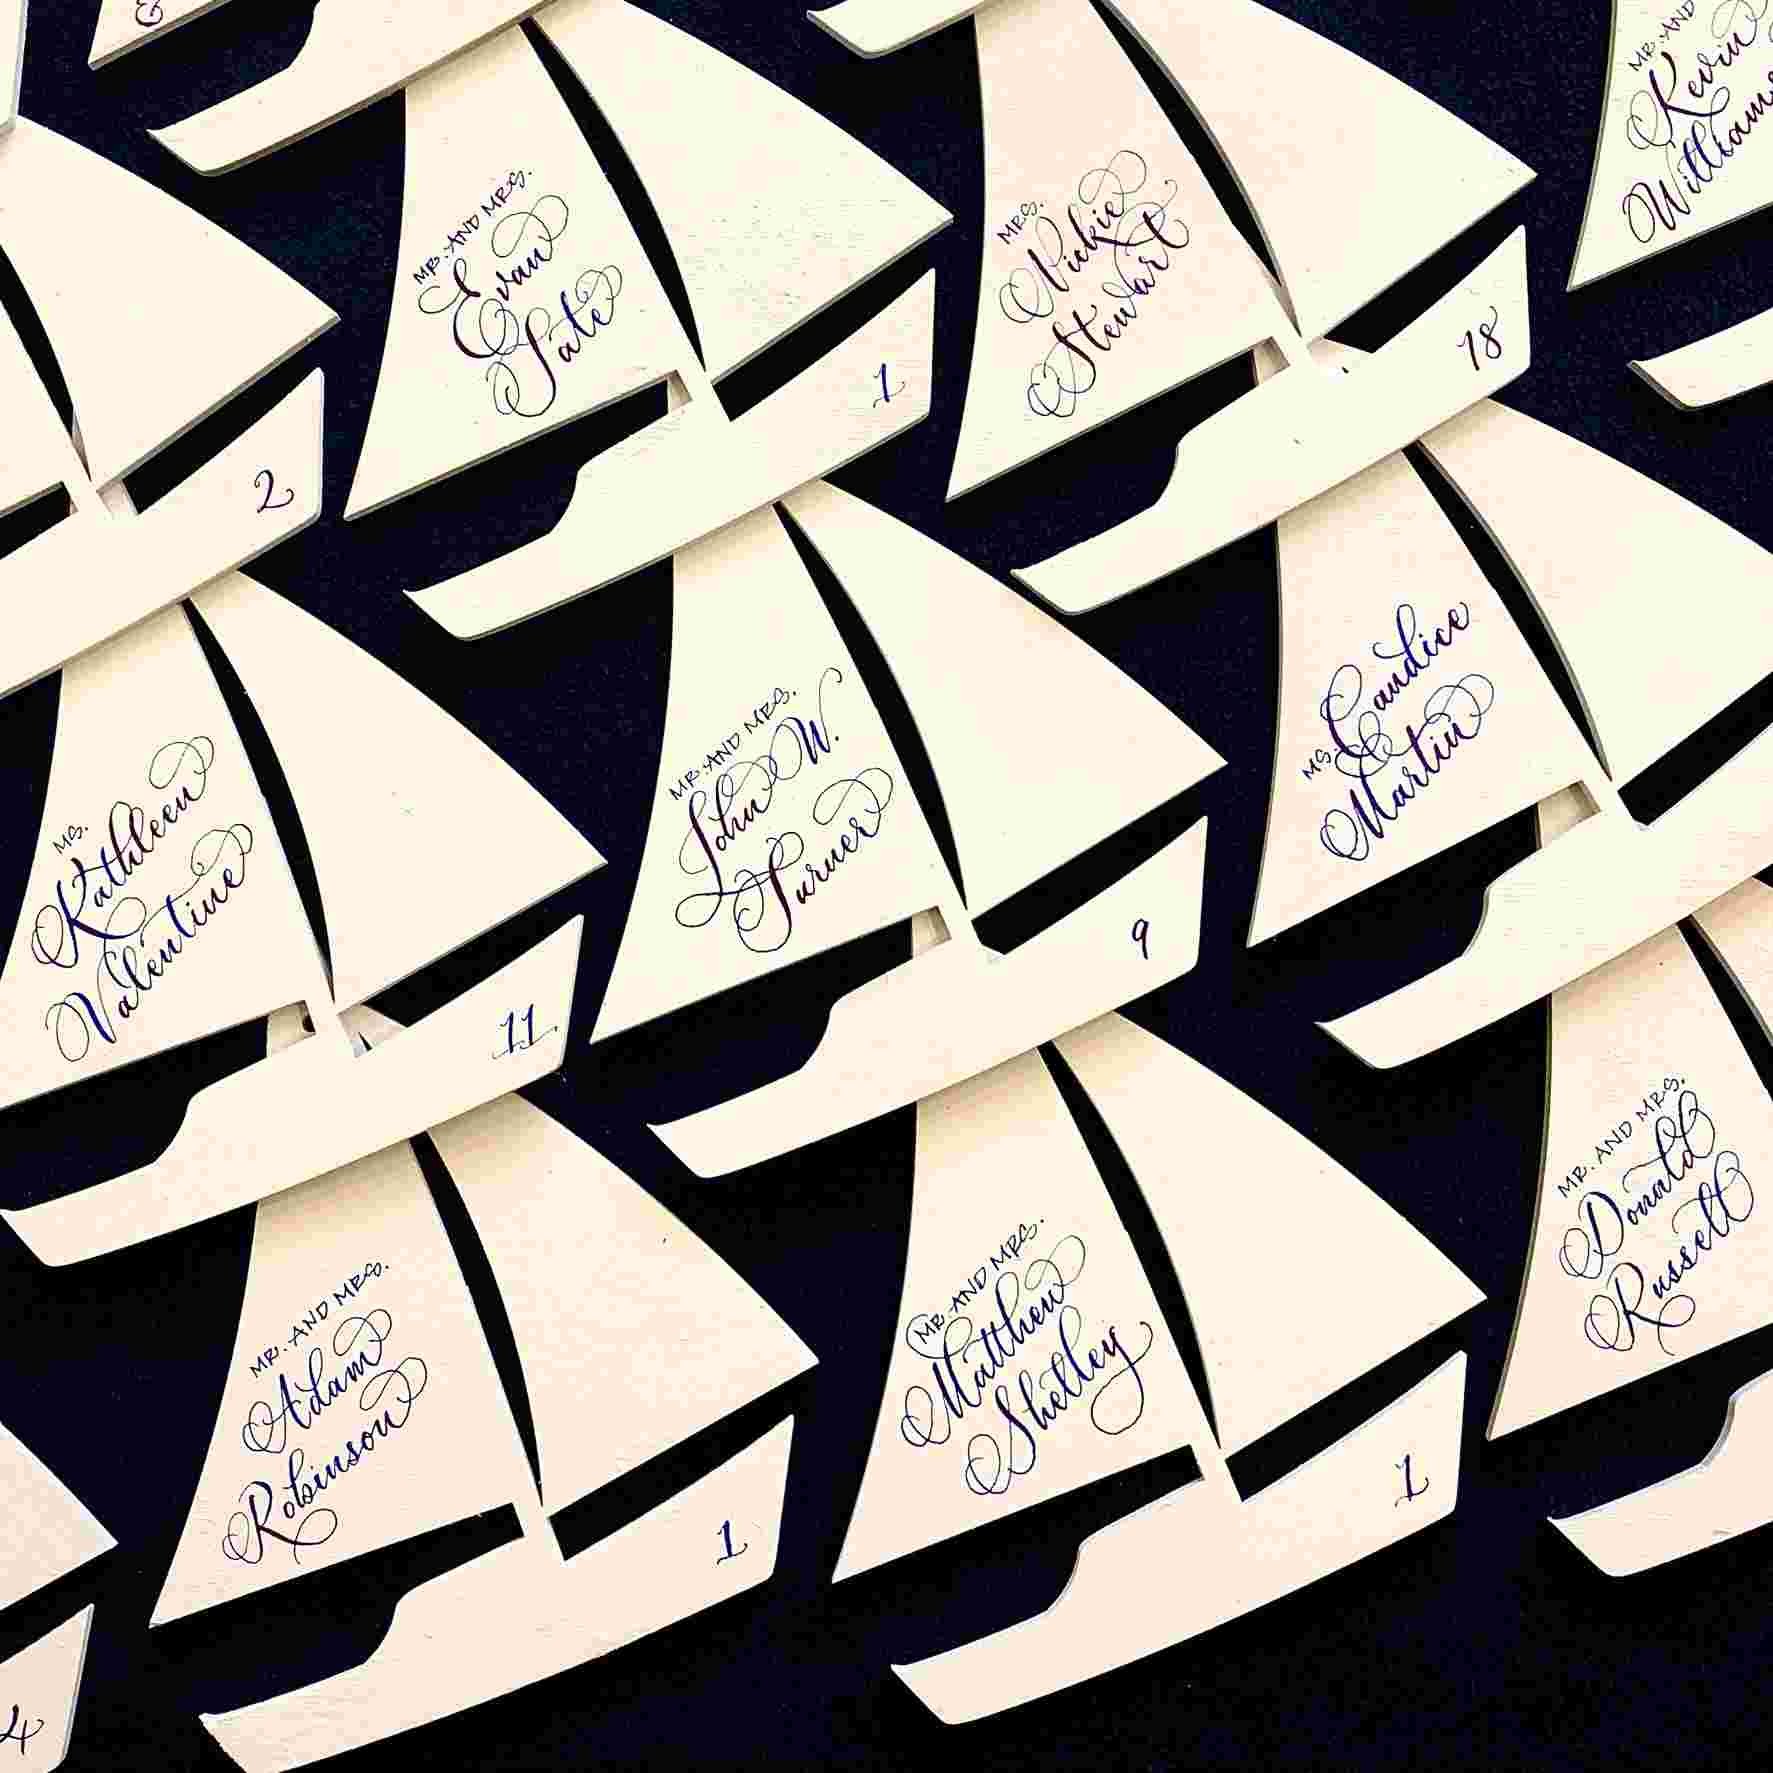 Wooden sailboat escort cards for a nautical themed wedding